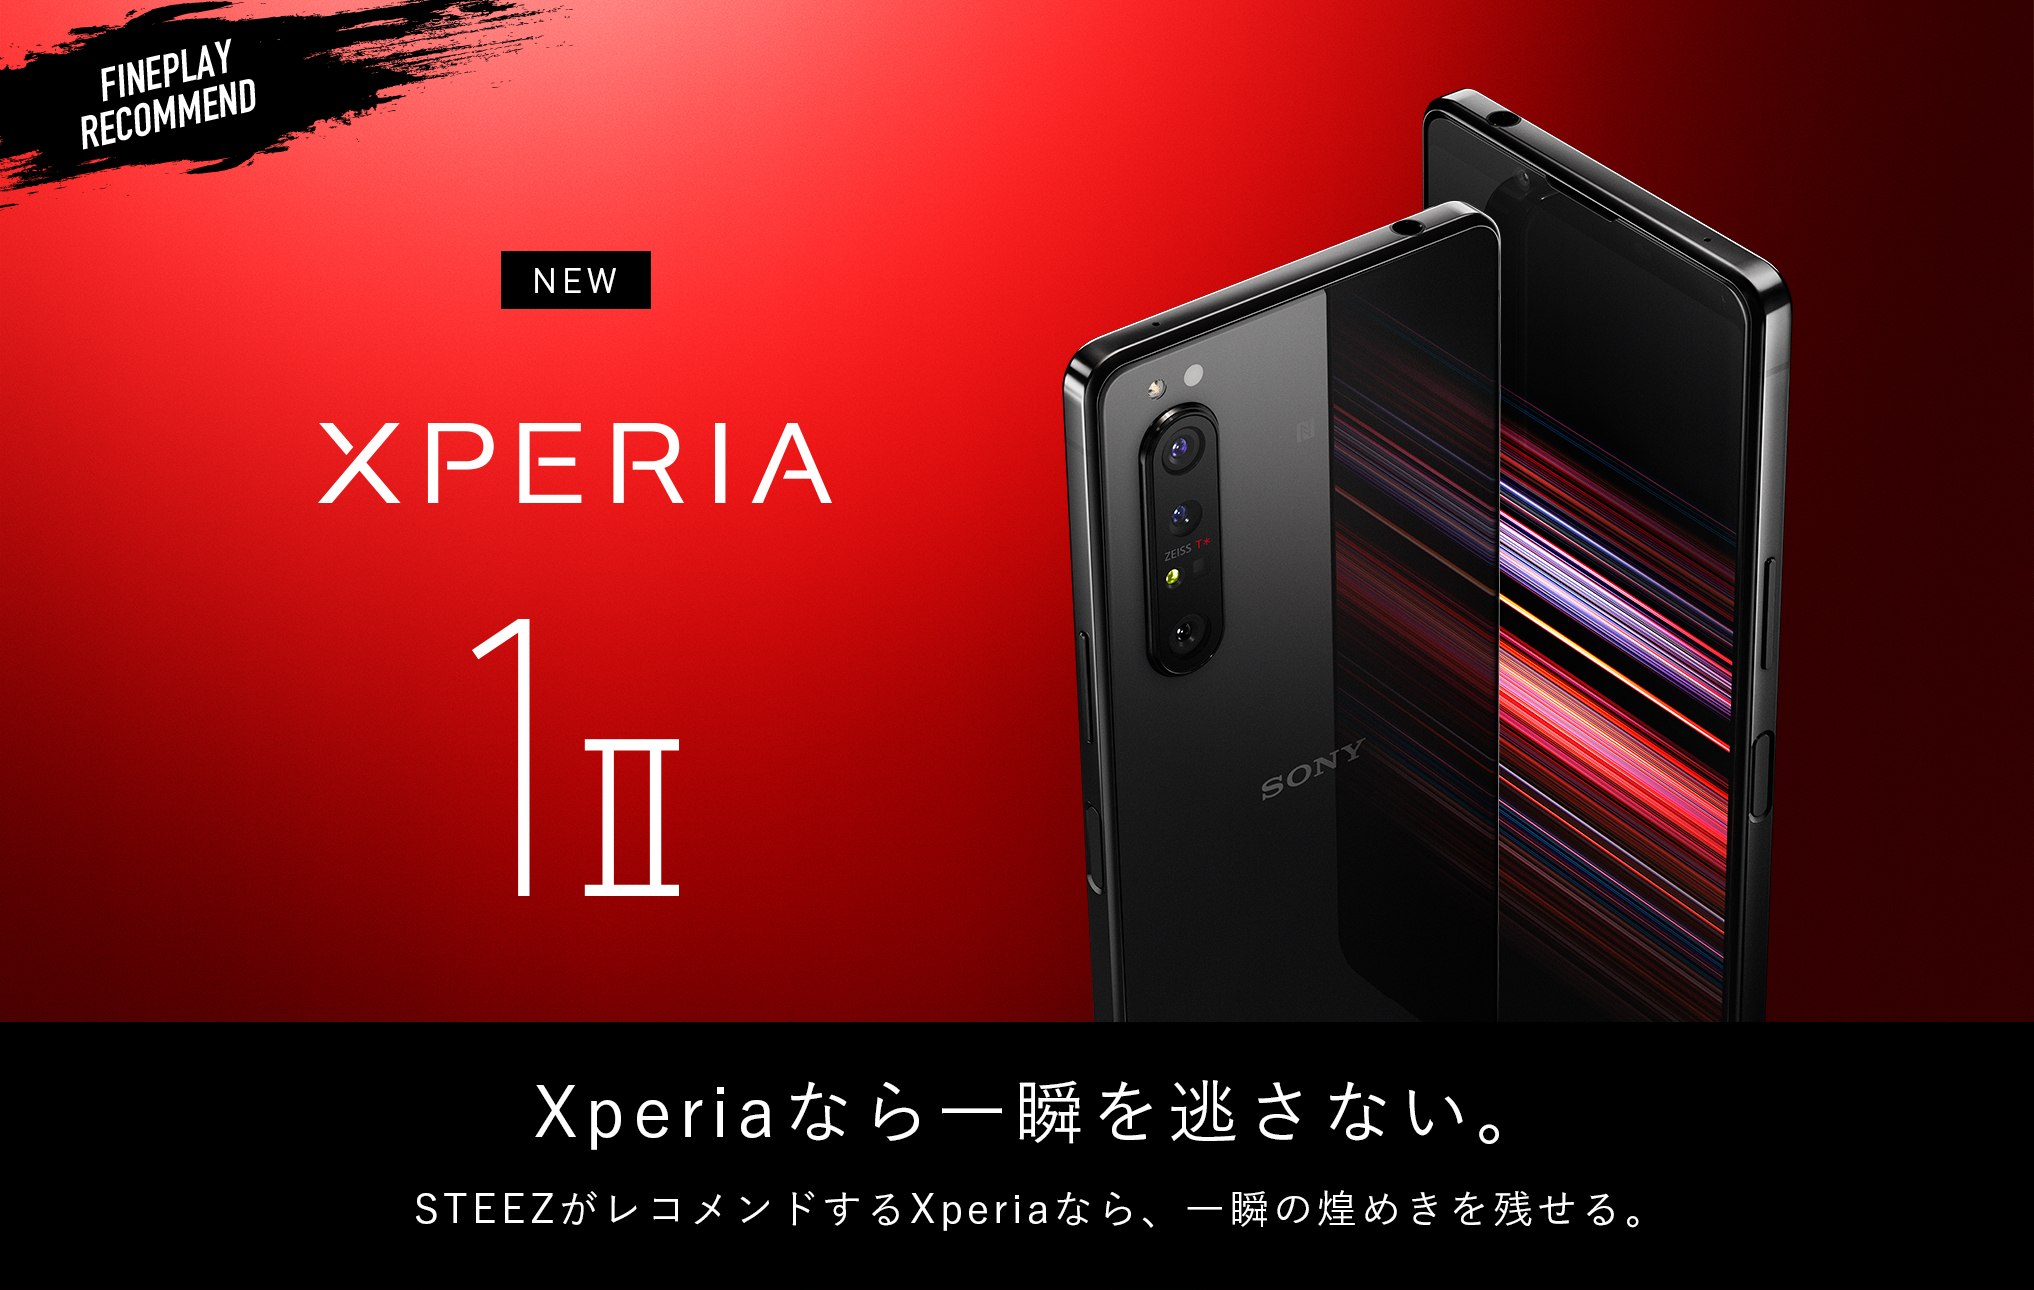 Xperia_banner_steez